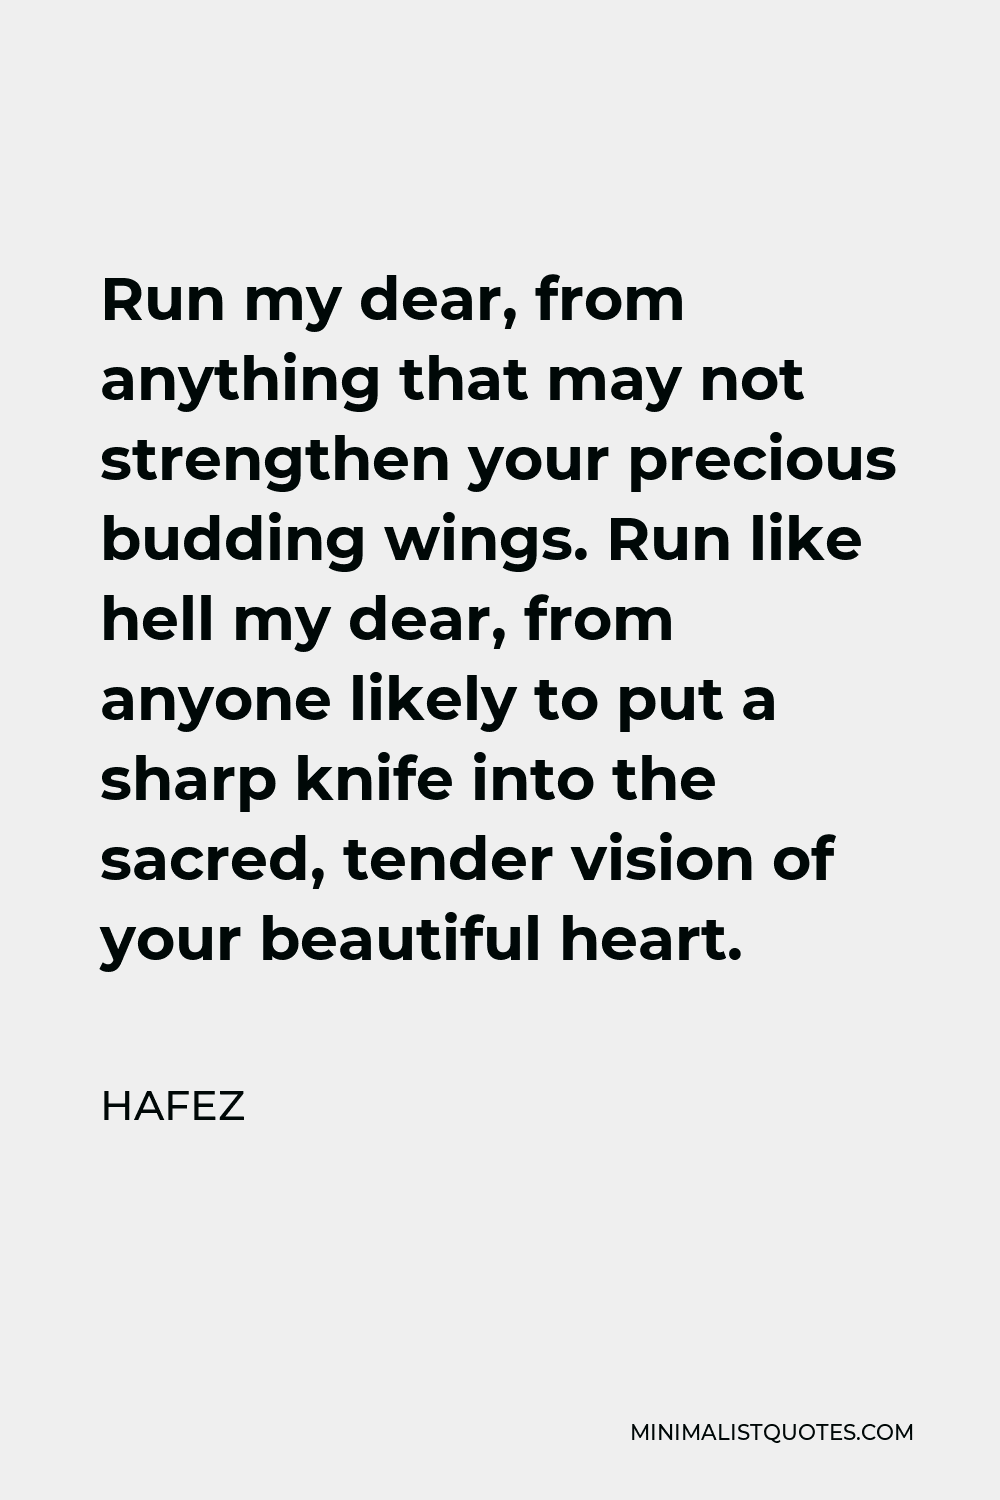 Hafez Quote - Run my dear, From anything, That may not strengthen, Your precious budding wings.